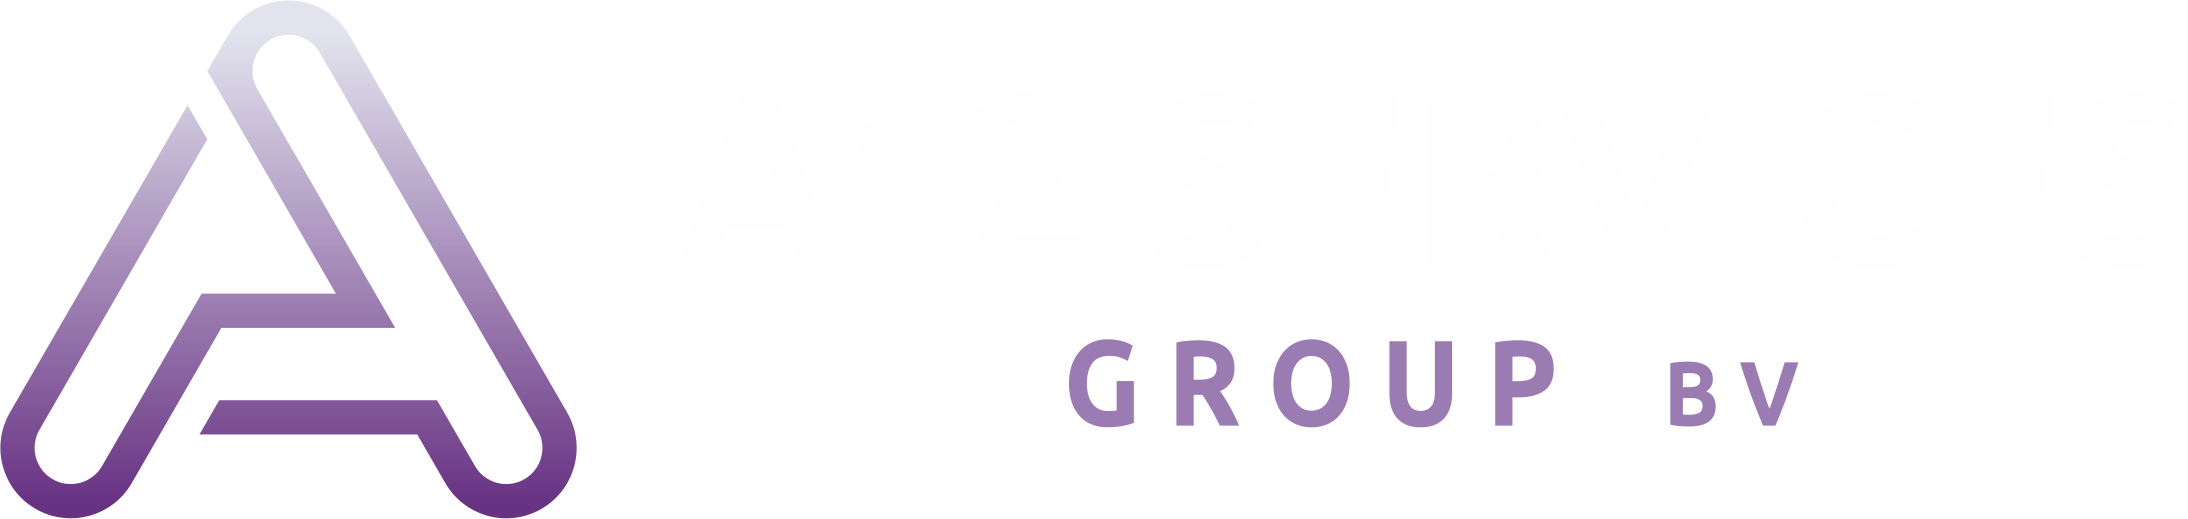 A12 Services Group BV